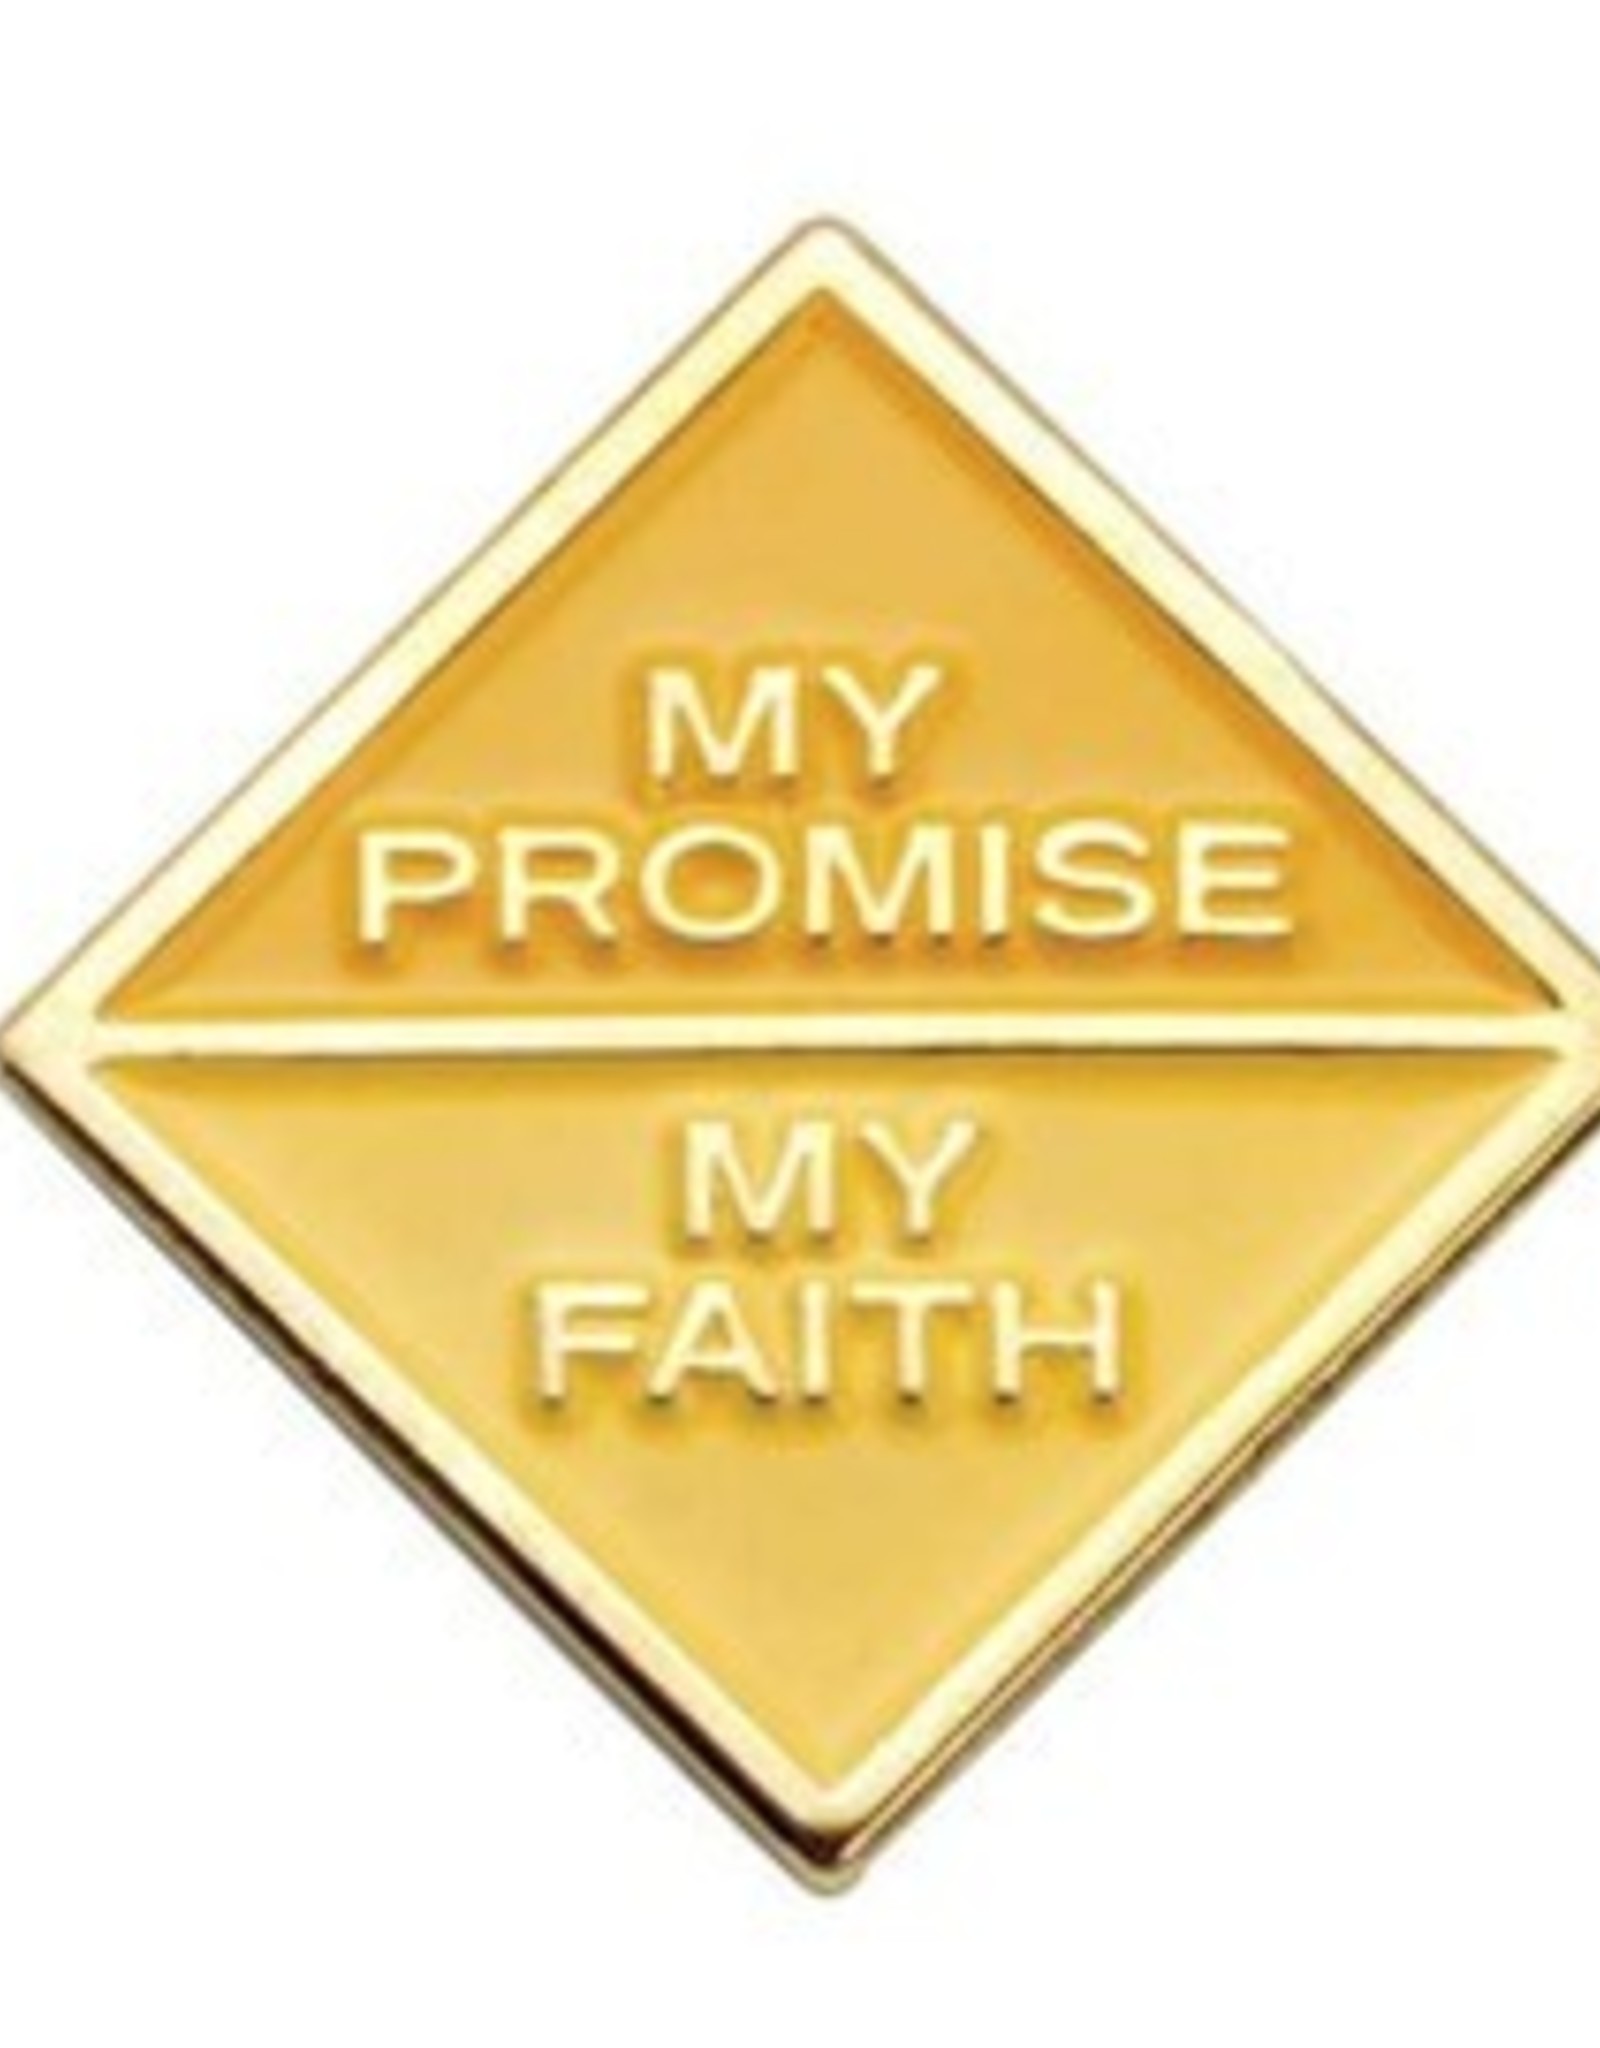 GIRL SCOUTS OF THE USA Ambassador My Promise/Faith Pin 2